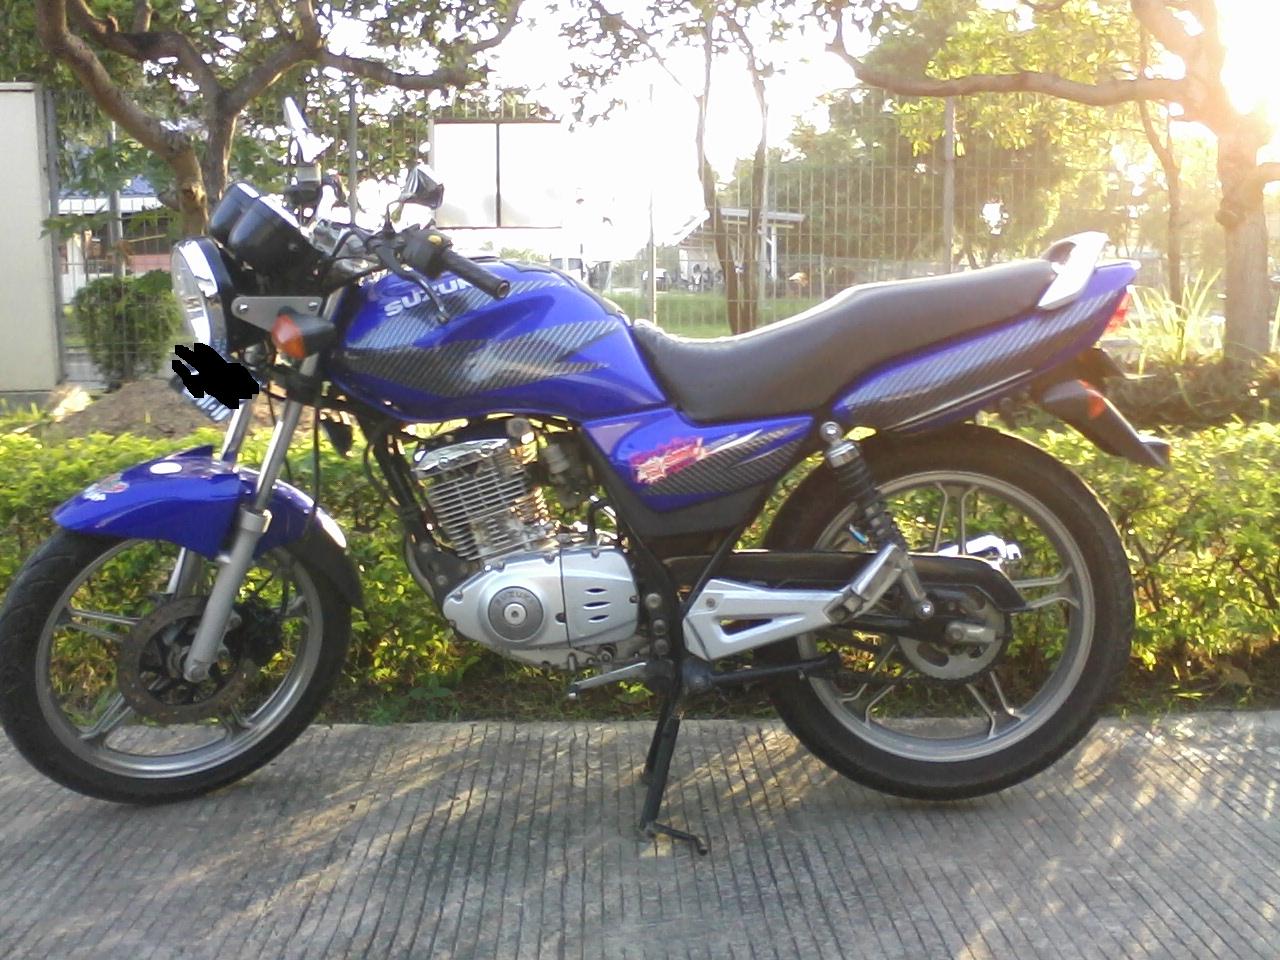 SOLD OUT SUZUKI THUNDER 125 Bachtiaryuan